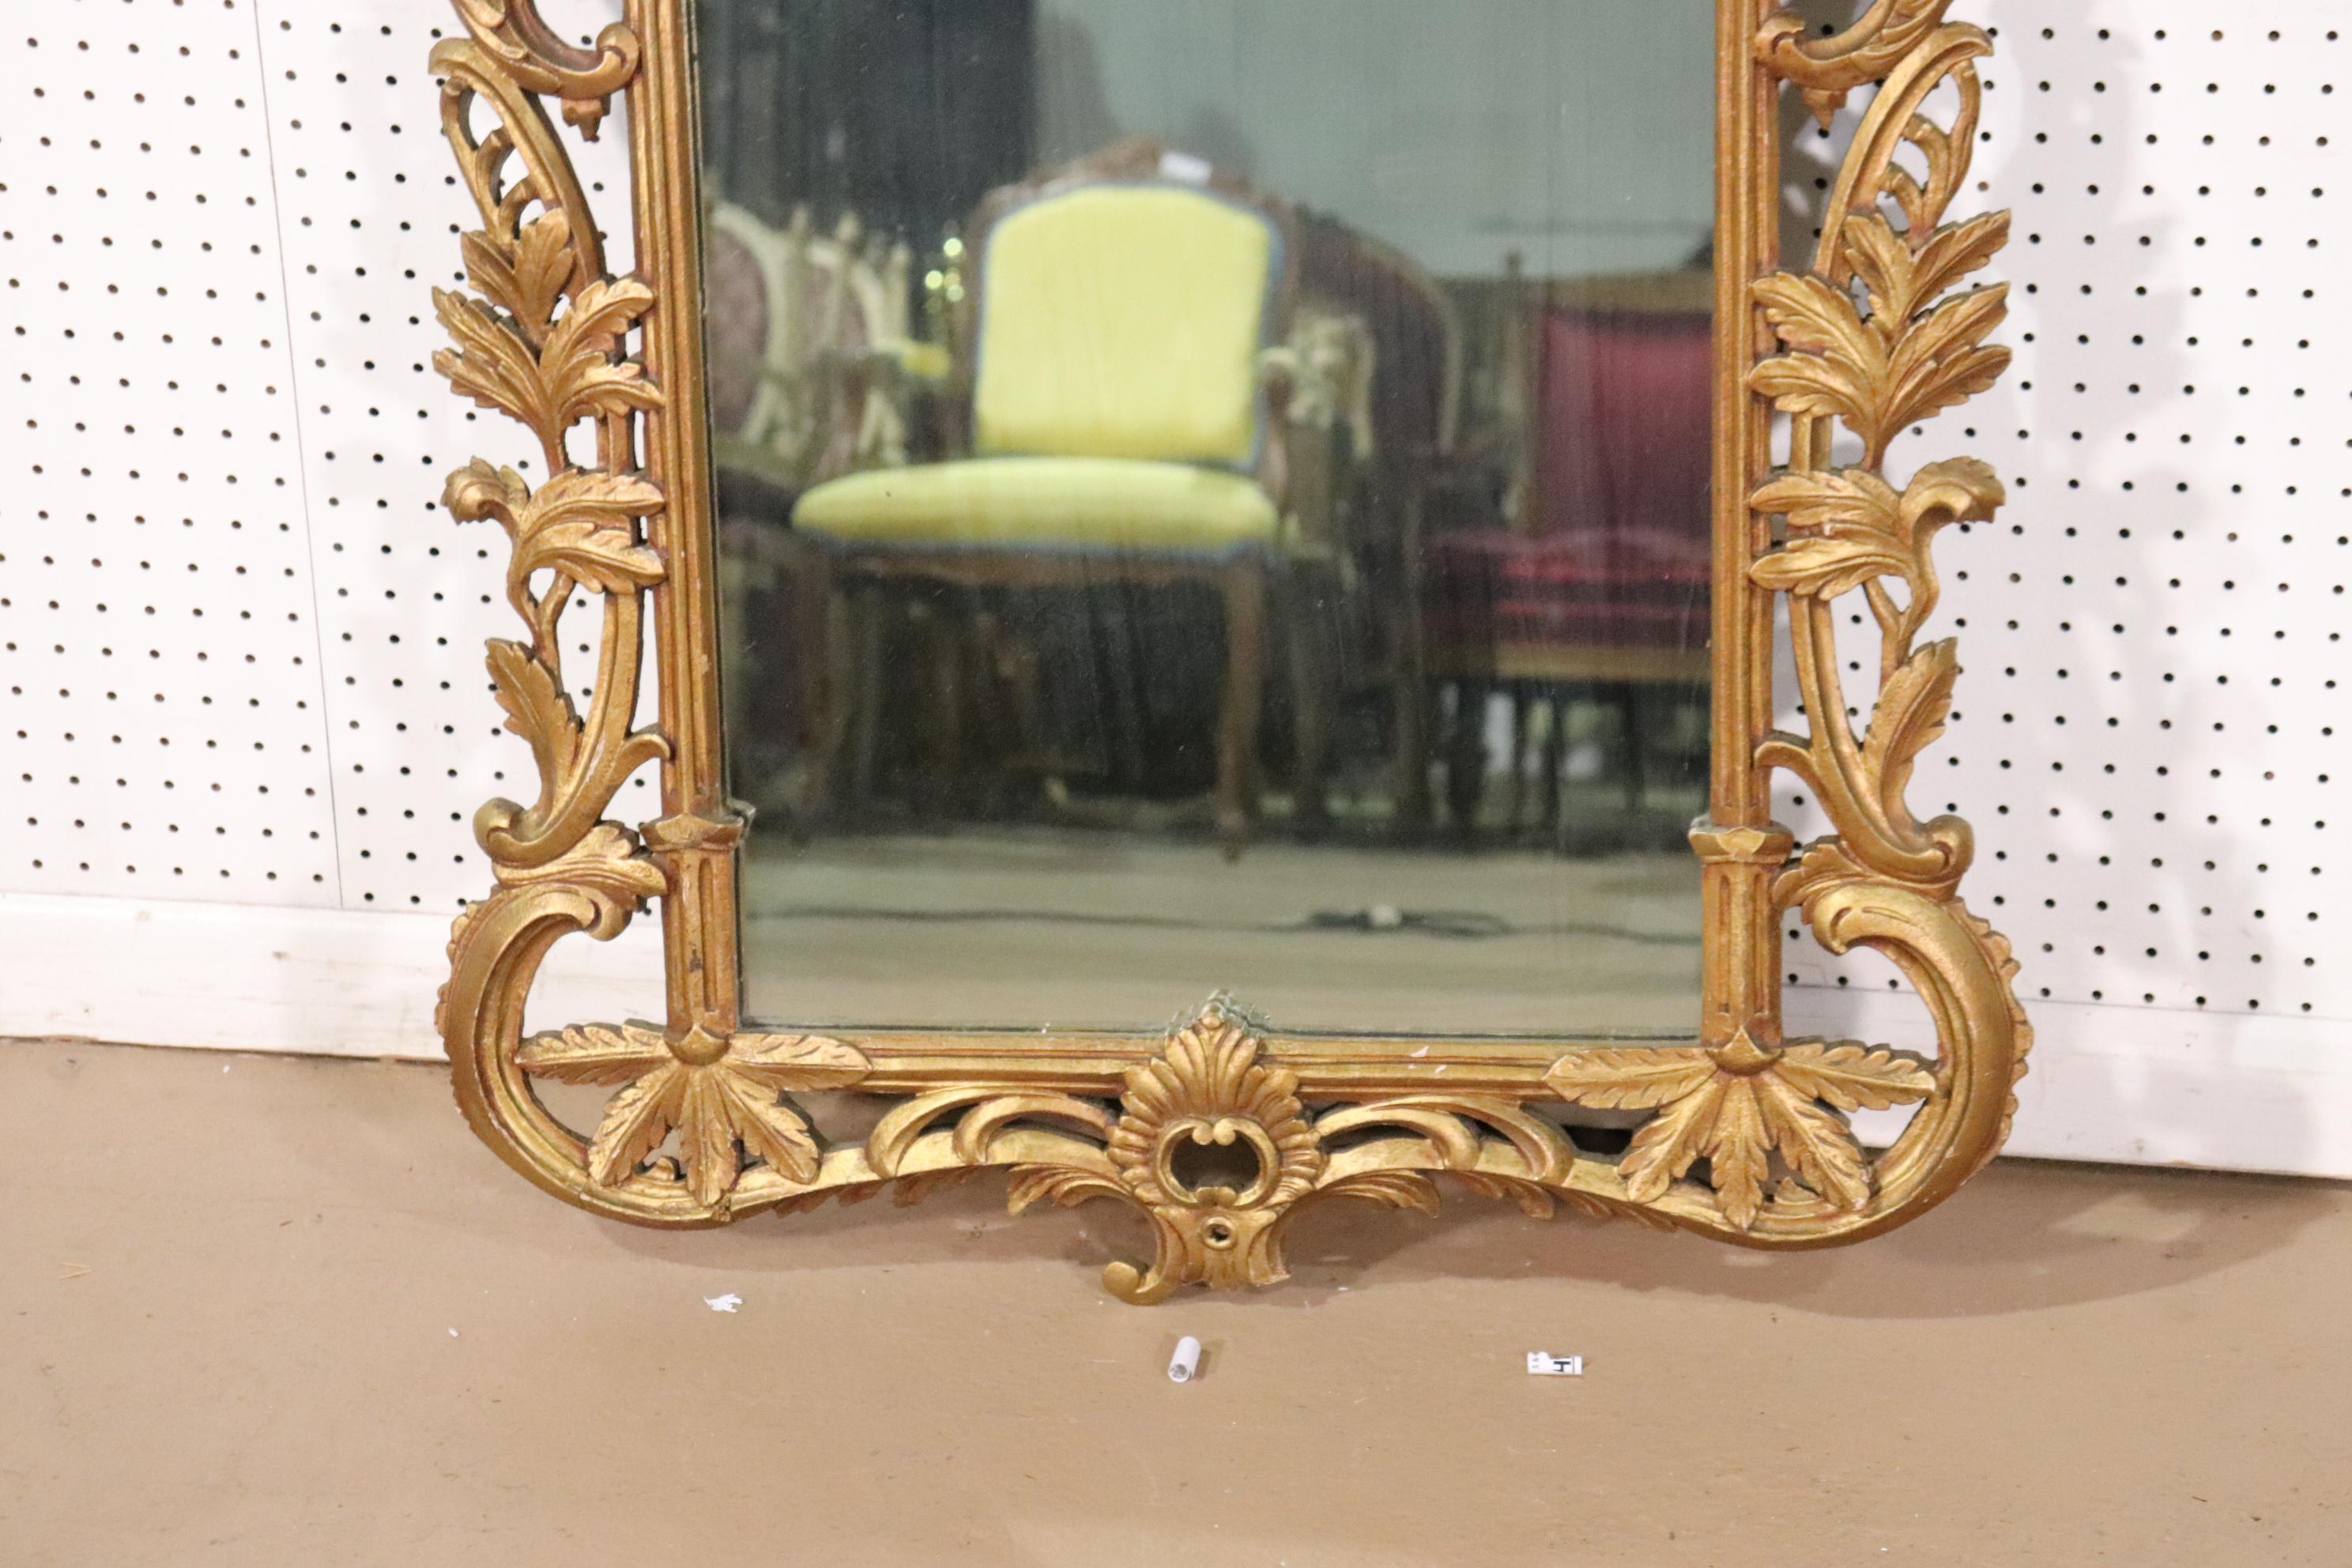 This is a beautiful wall mirror dating to the 1940s era. The mirror measures 42 tall x 32 wide. There is a small damage to the bottom which we will correct.